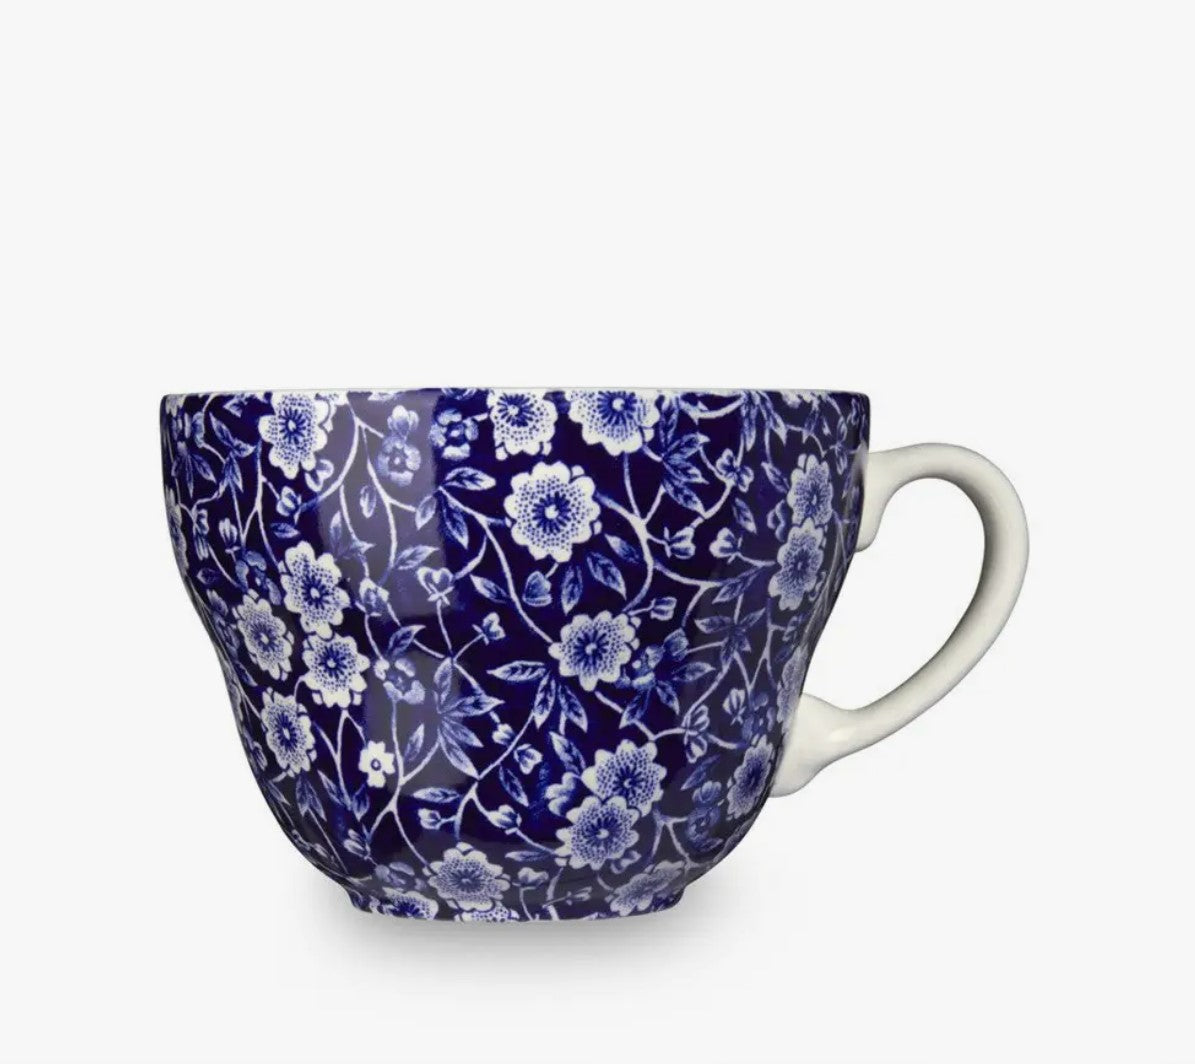 Blue Calico Breakfast Cup